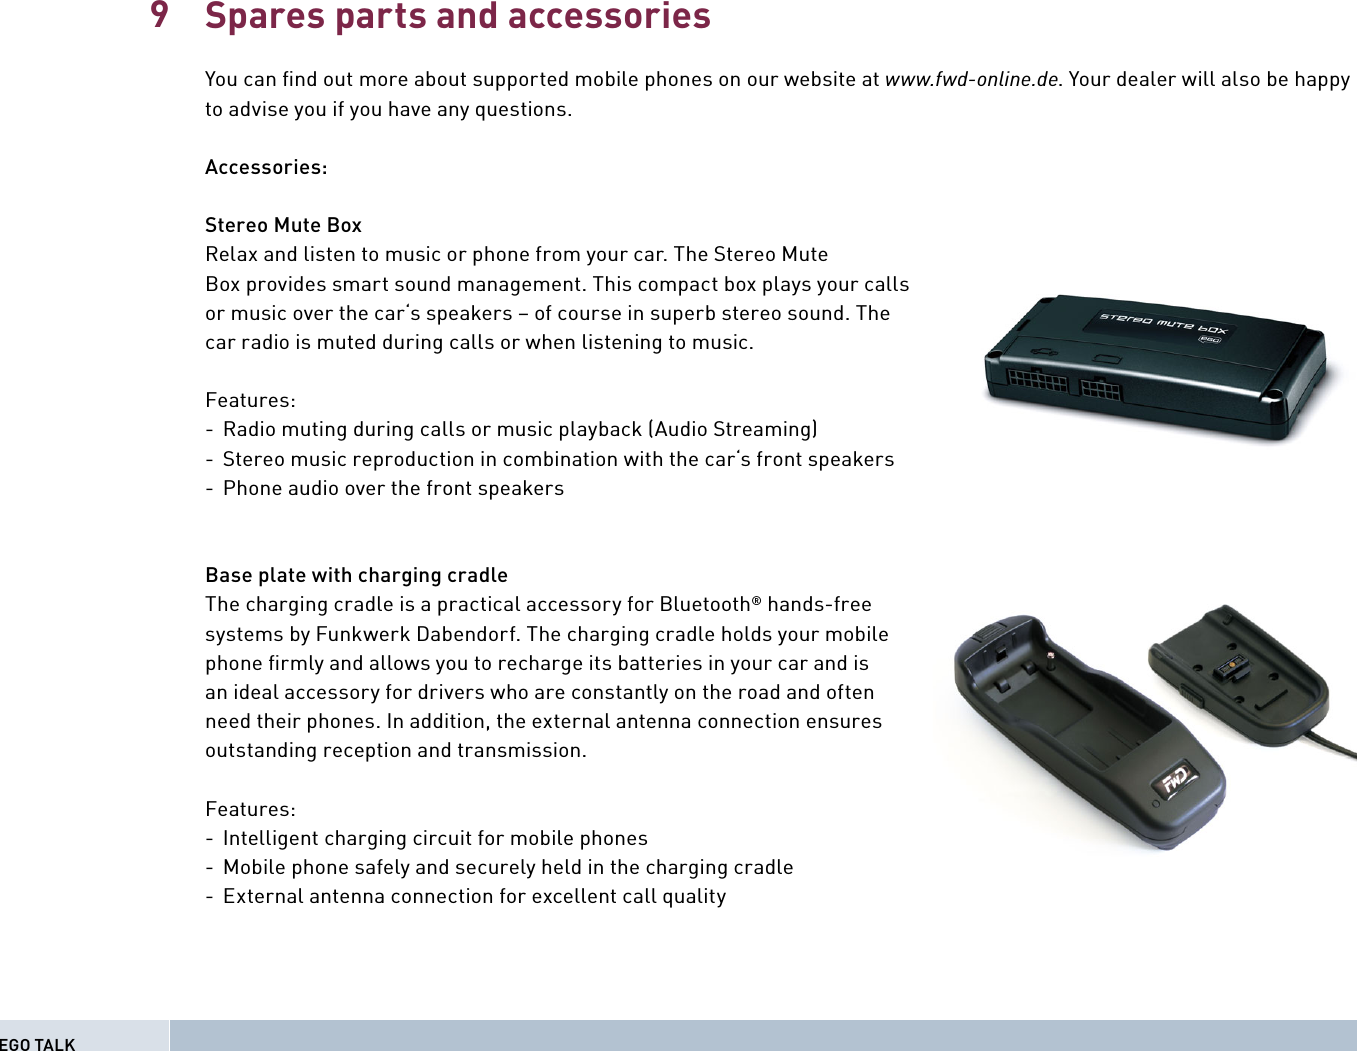 Spares parts and accessoriesYou can ﬁ nd out more about supported mobile phones on our website at www.fwd-online.de. Your dealer will also be happy to advise you if you have any questions.Accessories:Stereo Mute BoxRelax and listen to music or phone from your car. The Stereo Mute Box provides smart sound management. This compact box plays your calls or music over the car‘s speakers – of course in superb stereo sound. The car radio is muted during calls or when listening to music.Features:-  Radio muting during calls or music playback (Audio Streaming)-  Stereo music reproduction in combination with the car‘s front speakers -  Phone audio over the front speakers Base plate with charging cradleThe charging cradle is a practical accessory for Bluetooth® hands-free systems by Funkwerk Dabendorf. The charging cradle holds your mobile phone ﬁ rmly and allows you to recharge its batteries in your car and is an ideal accessory for drivers who are constantly on the road and often need their phones. In addition, the external antenna connection ensures outstanding reception and transmission.Features:-  Intelligent charging circuit for mobile phones-  Mobile phone safely and securely held in the charging cradle-  External antenna connection for excellent call quality9EGO TALK